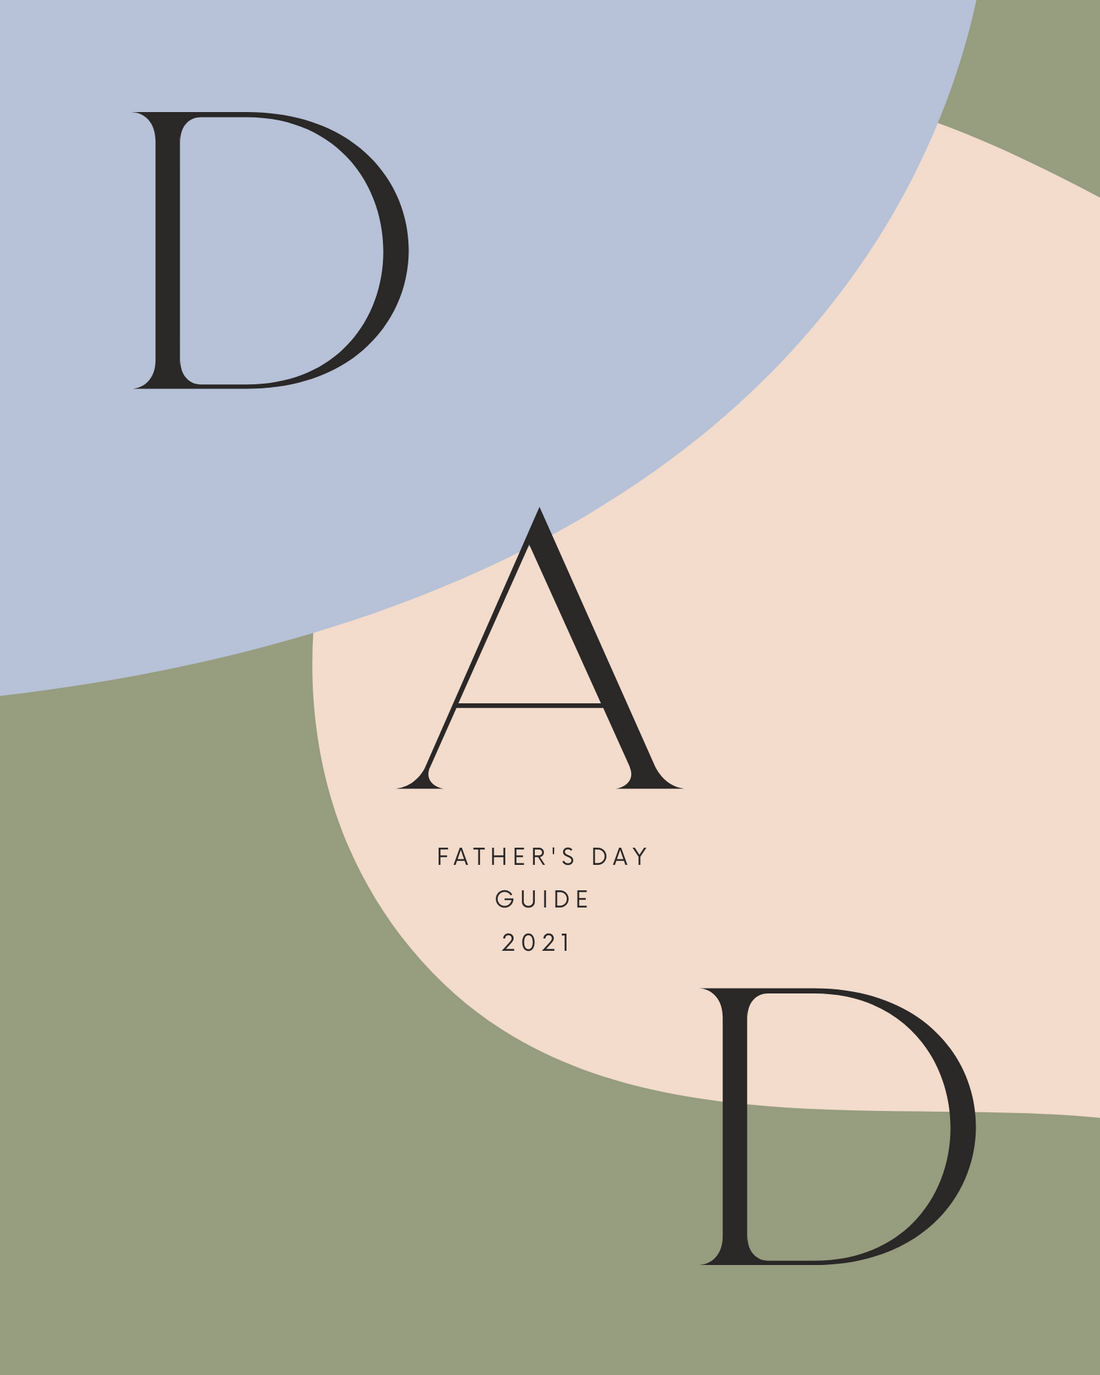 Father's Day Guide 2021